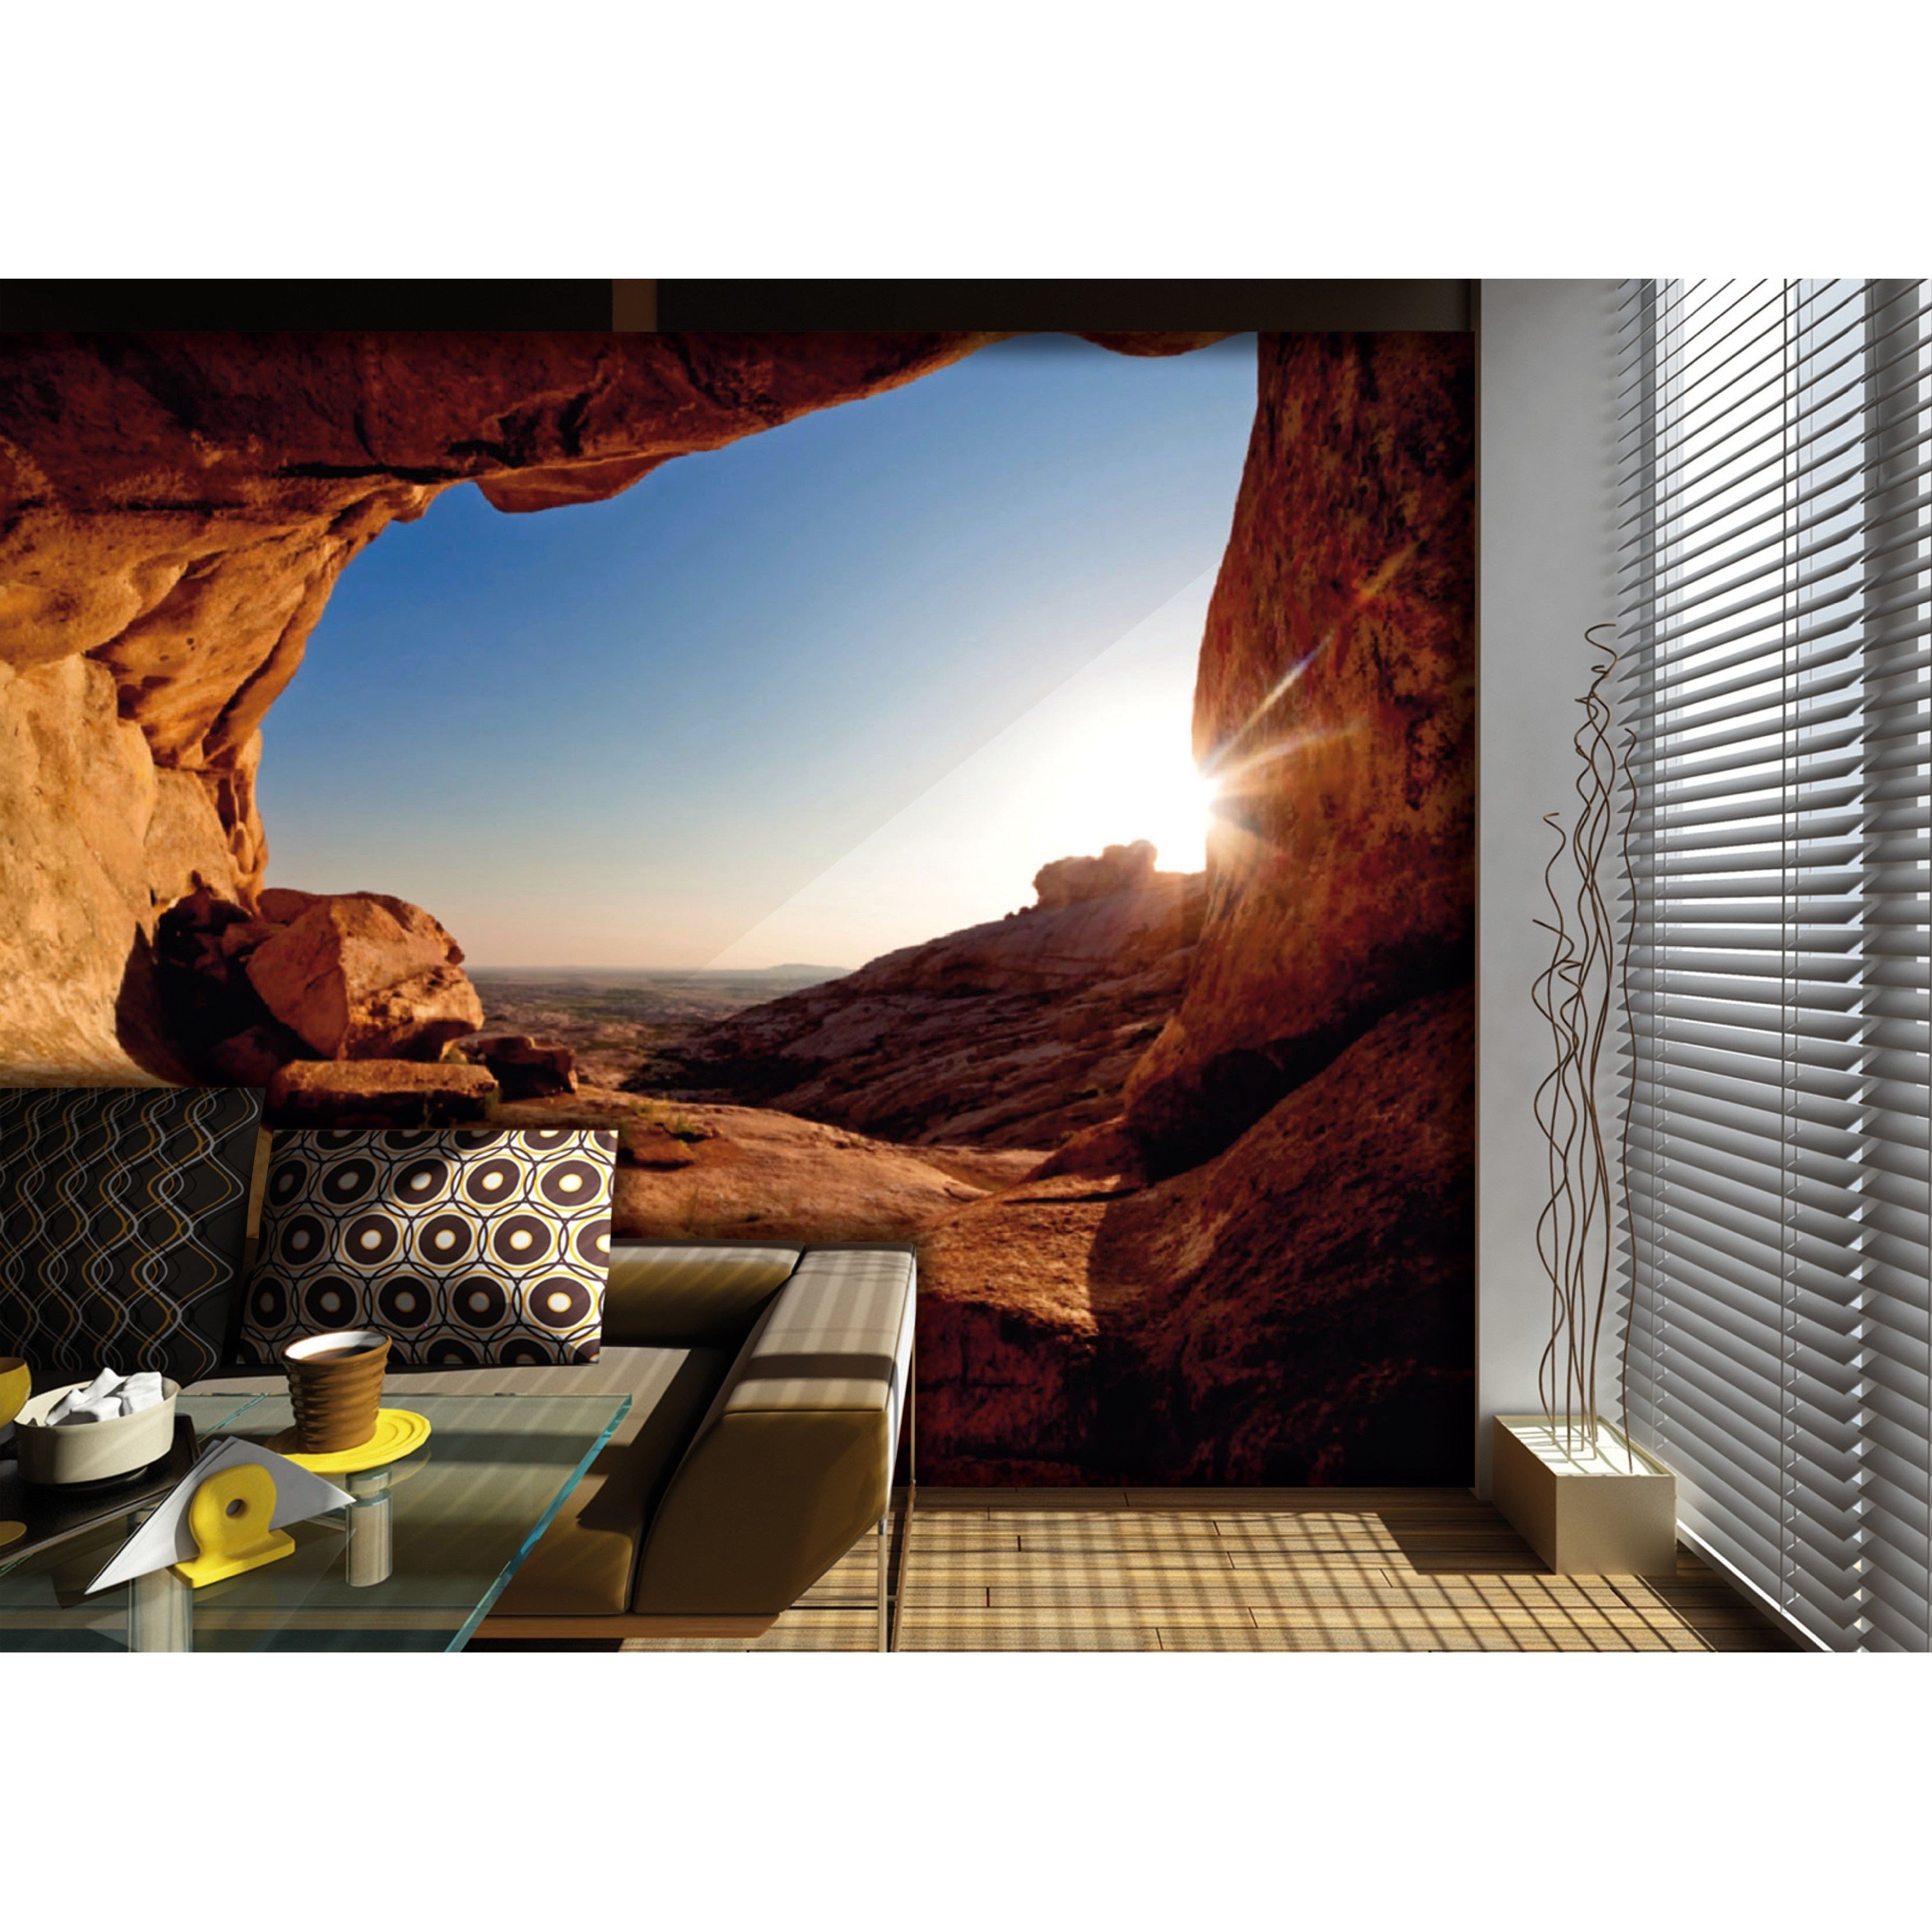 Cave Sunset Serenity: Wall Mural